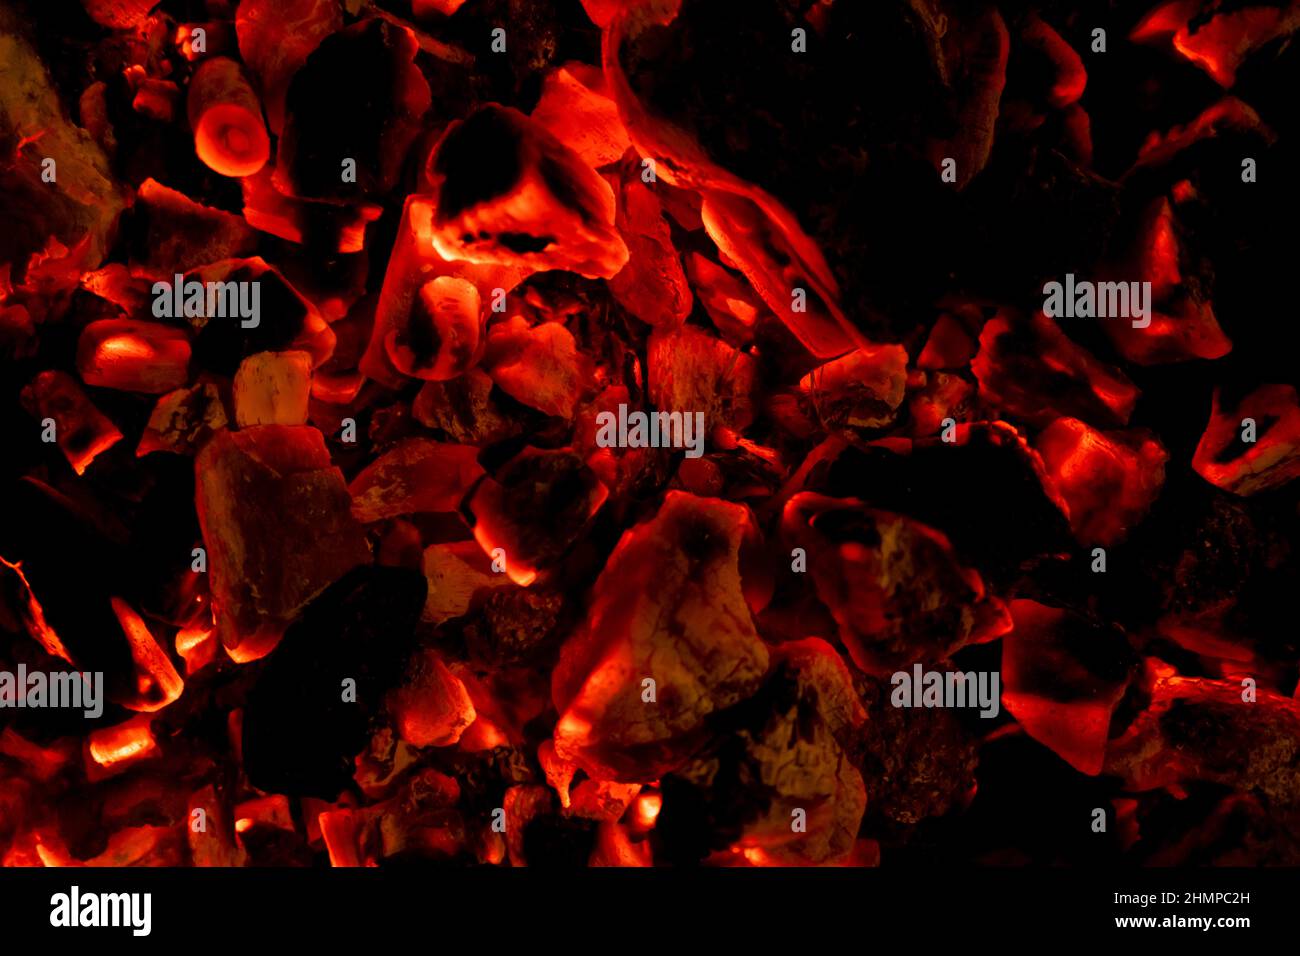 Glowing embers in hot red color, abstract background. The hot embers of burning wood log fire. Firewood burning on grill. Texture fire bonfire embers Stock Photo